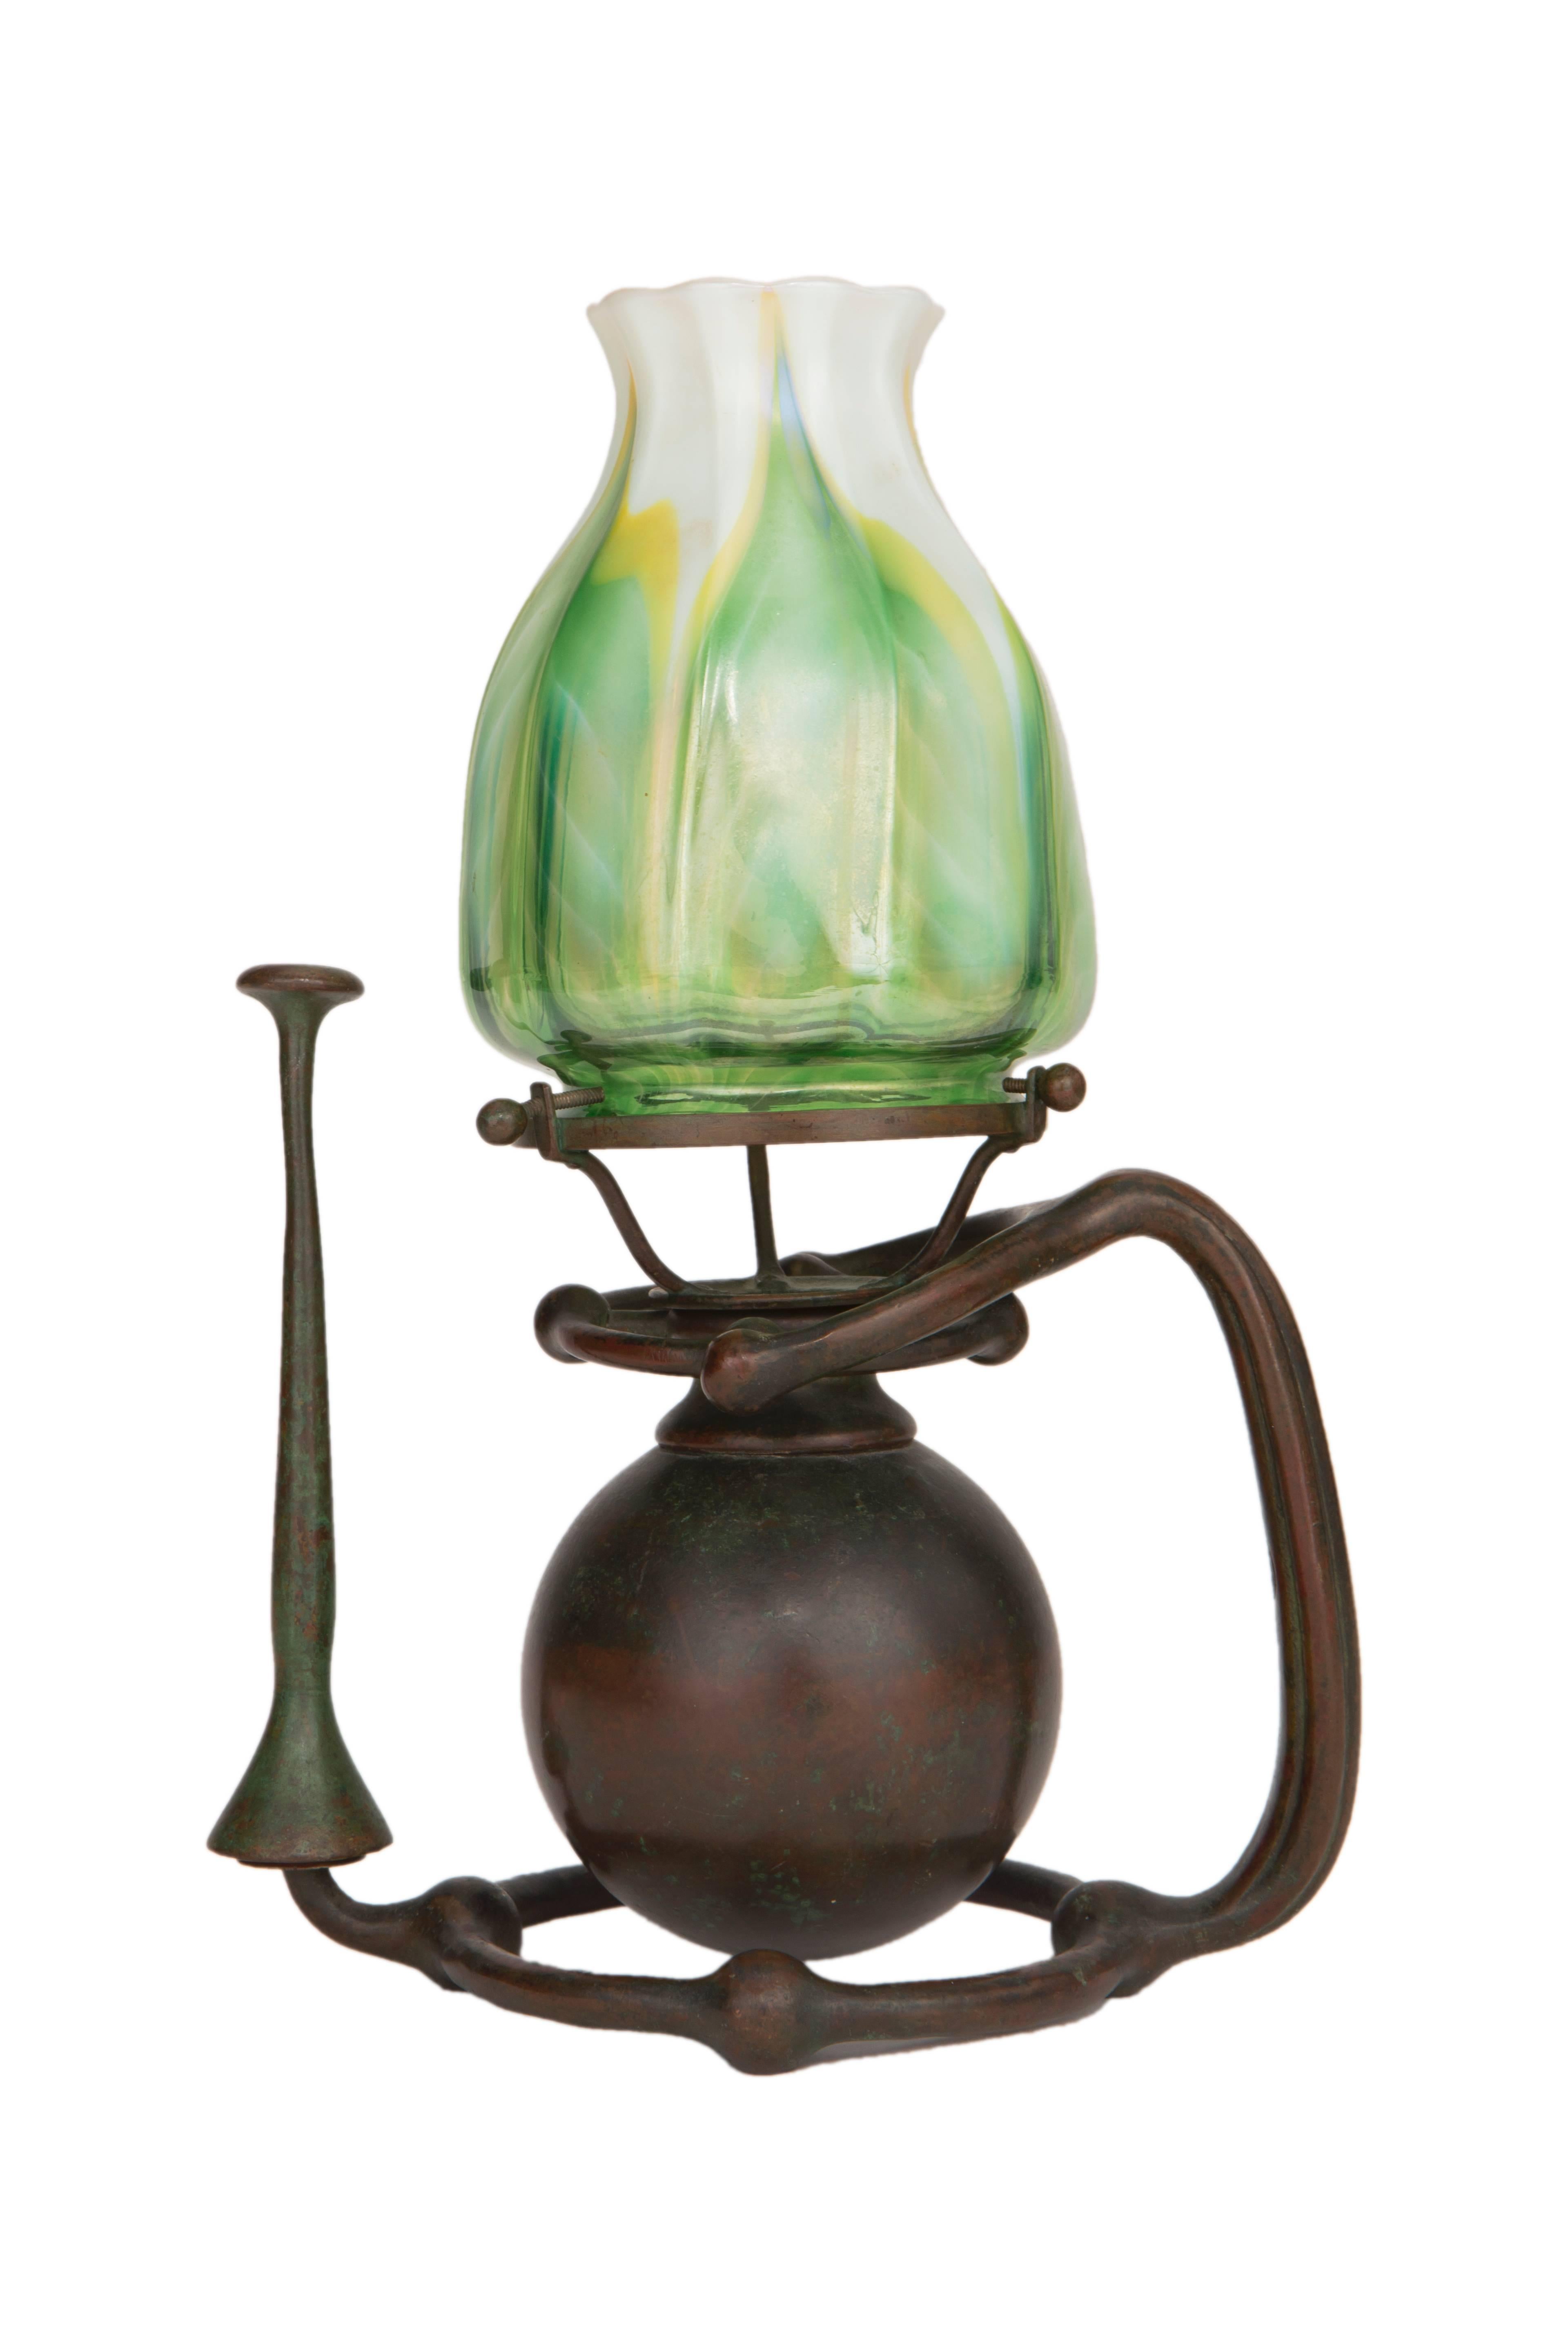 An exceptionally rare American Art Nouveau patinated bronze and glass 